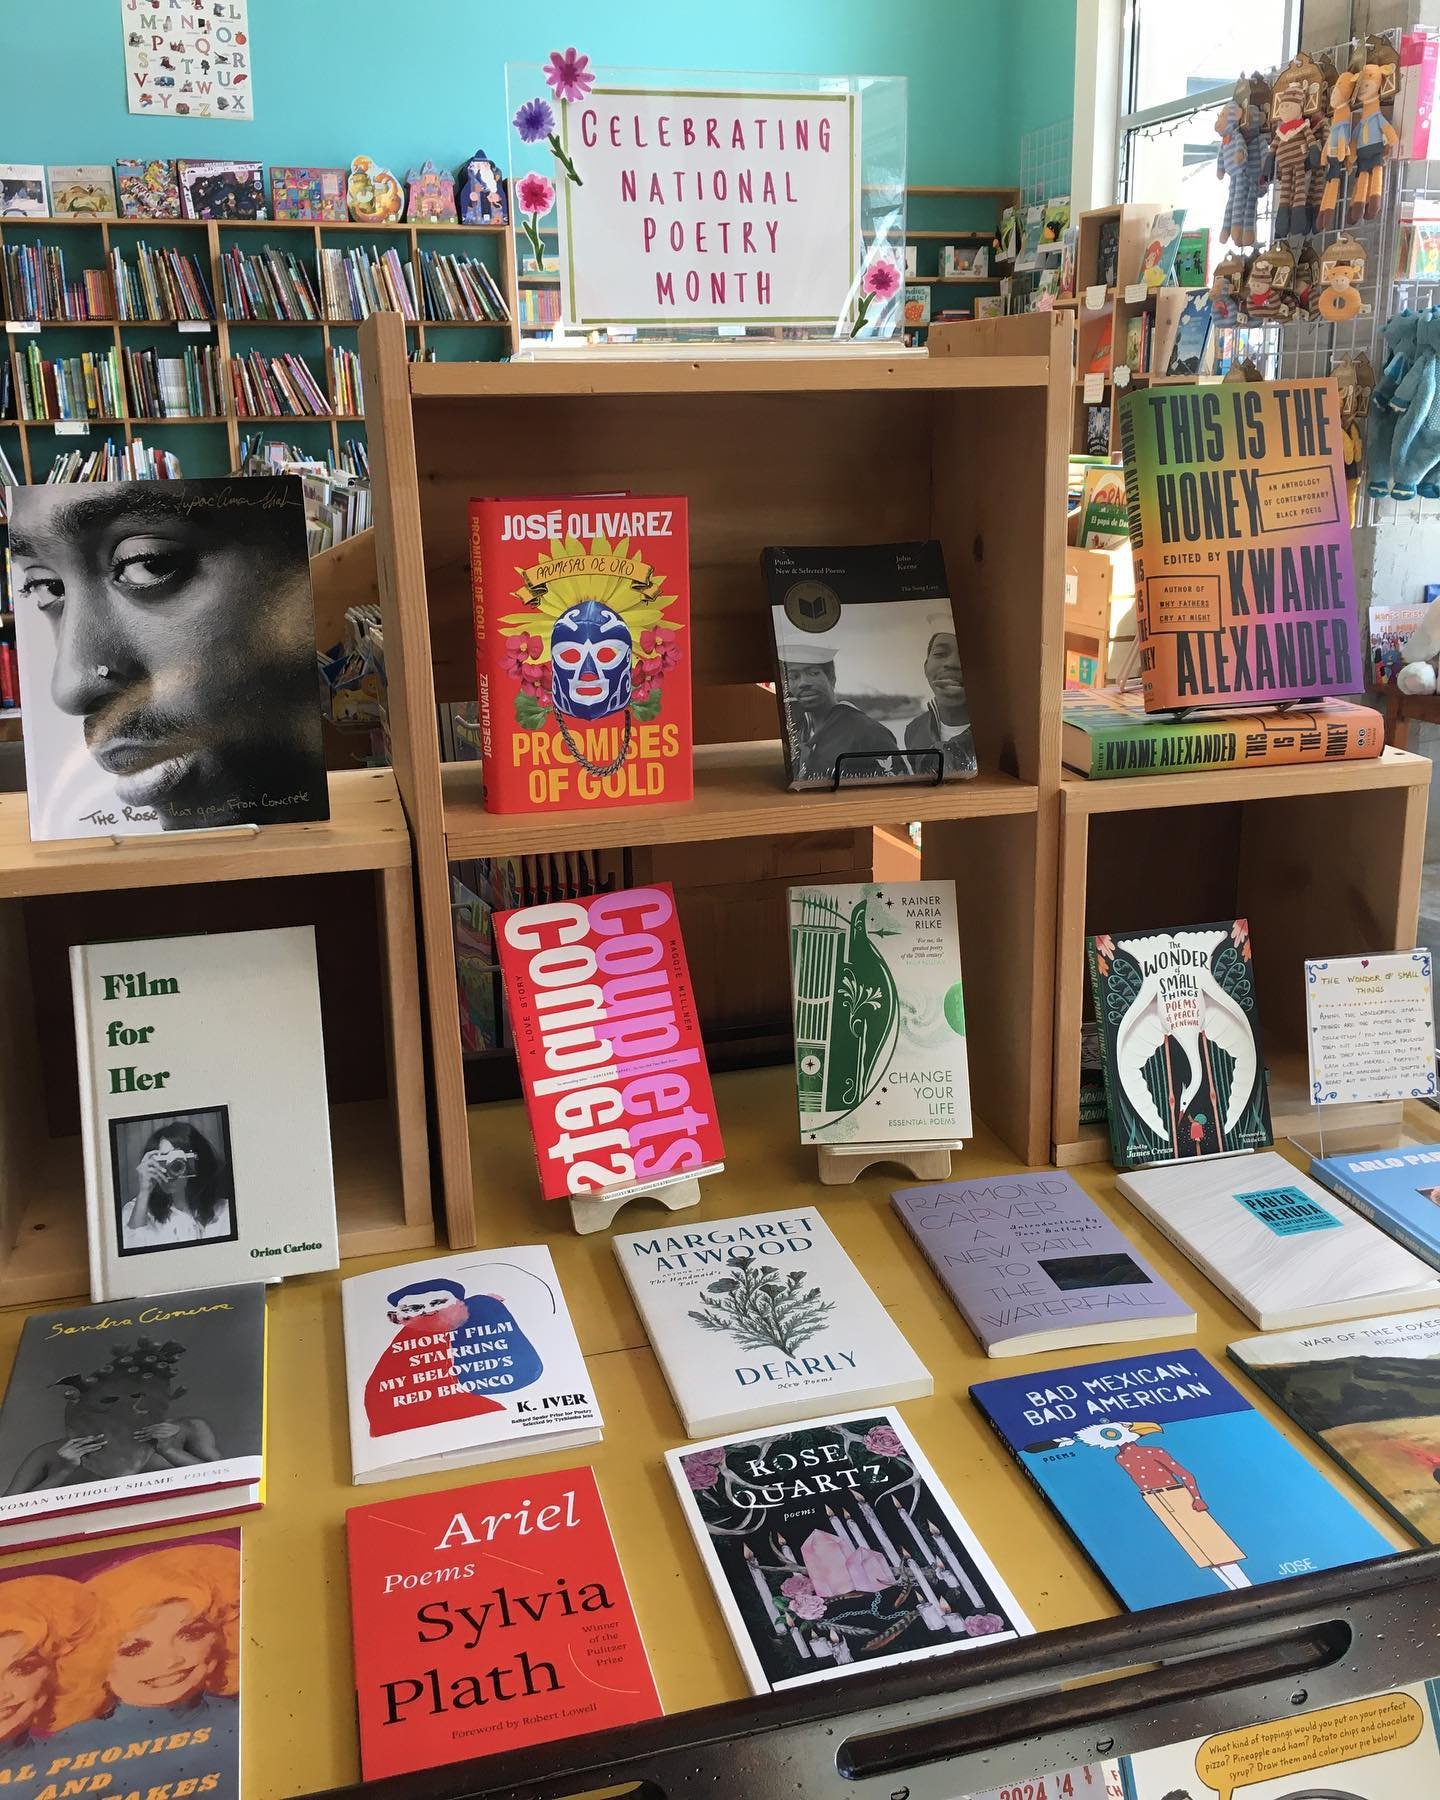 Happy National Poetry Month! We have displays around the store showcasing our picks for this month. Come in and browse!

#nationalpoetrymonth #womenpoets #childrenspoetrybooks